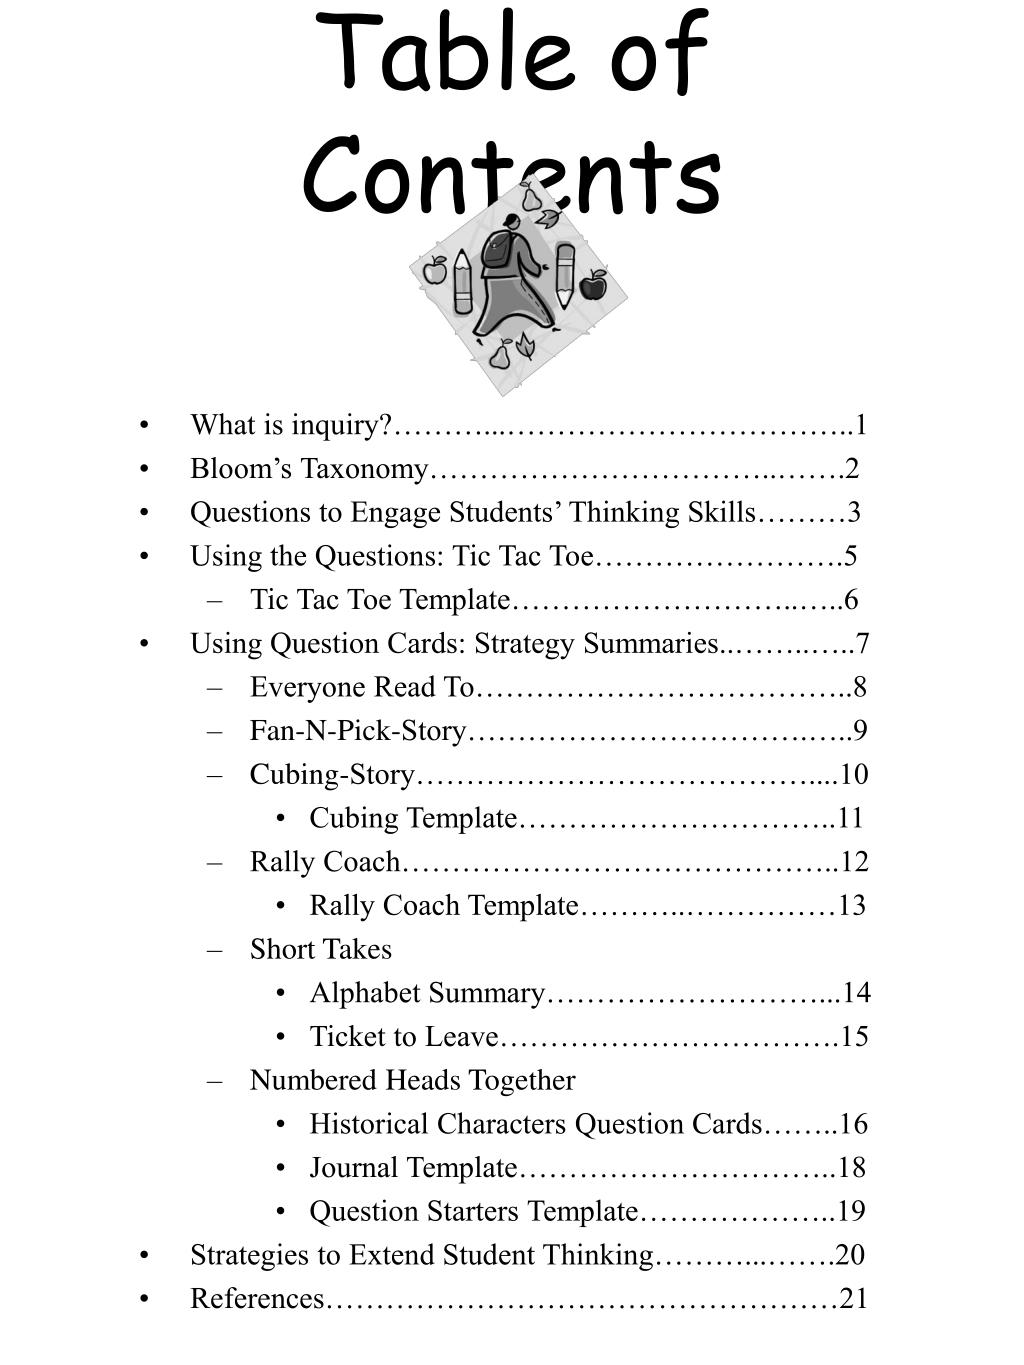 21 Table Of Contents Templates Examples Word Ppt ᐅ Templatelab - Vrogue